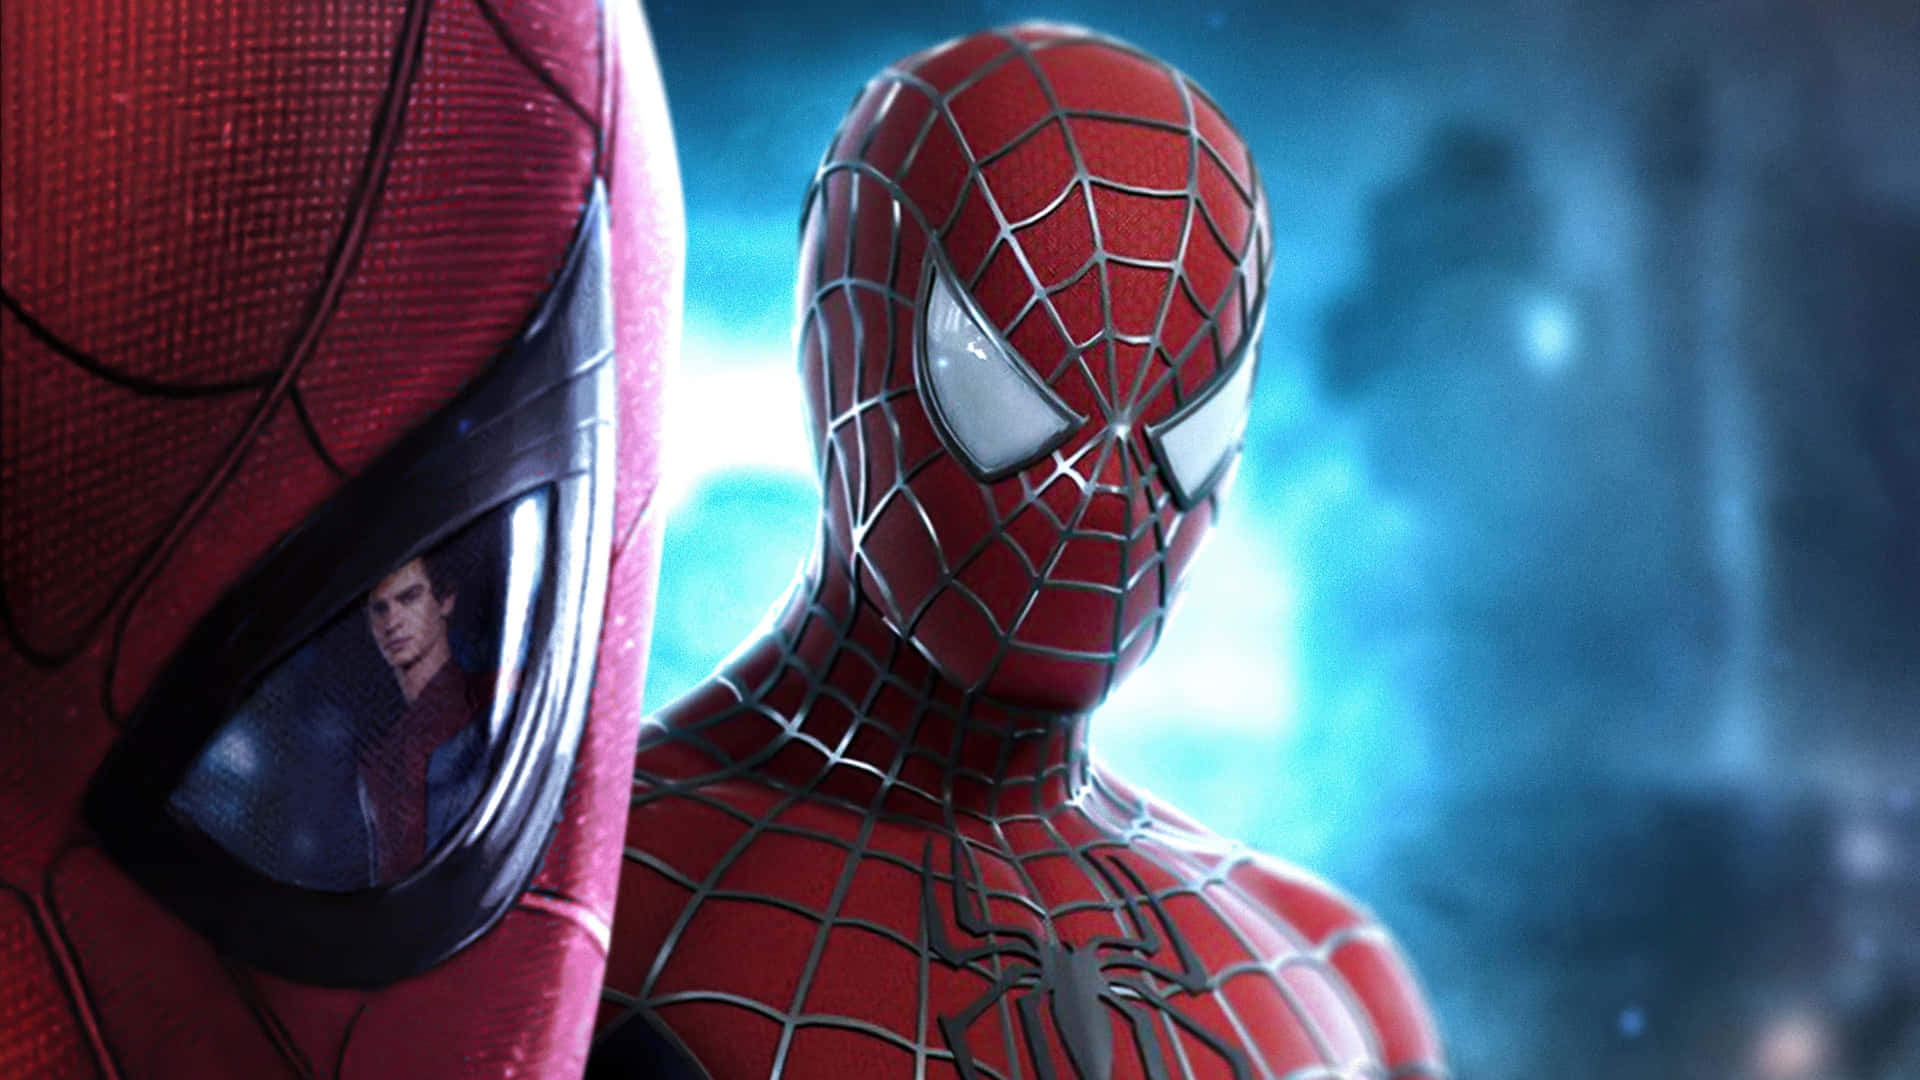 Unveiling the Hero - Dynamic Spider-Man Profile Picture Wallpaper